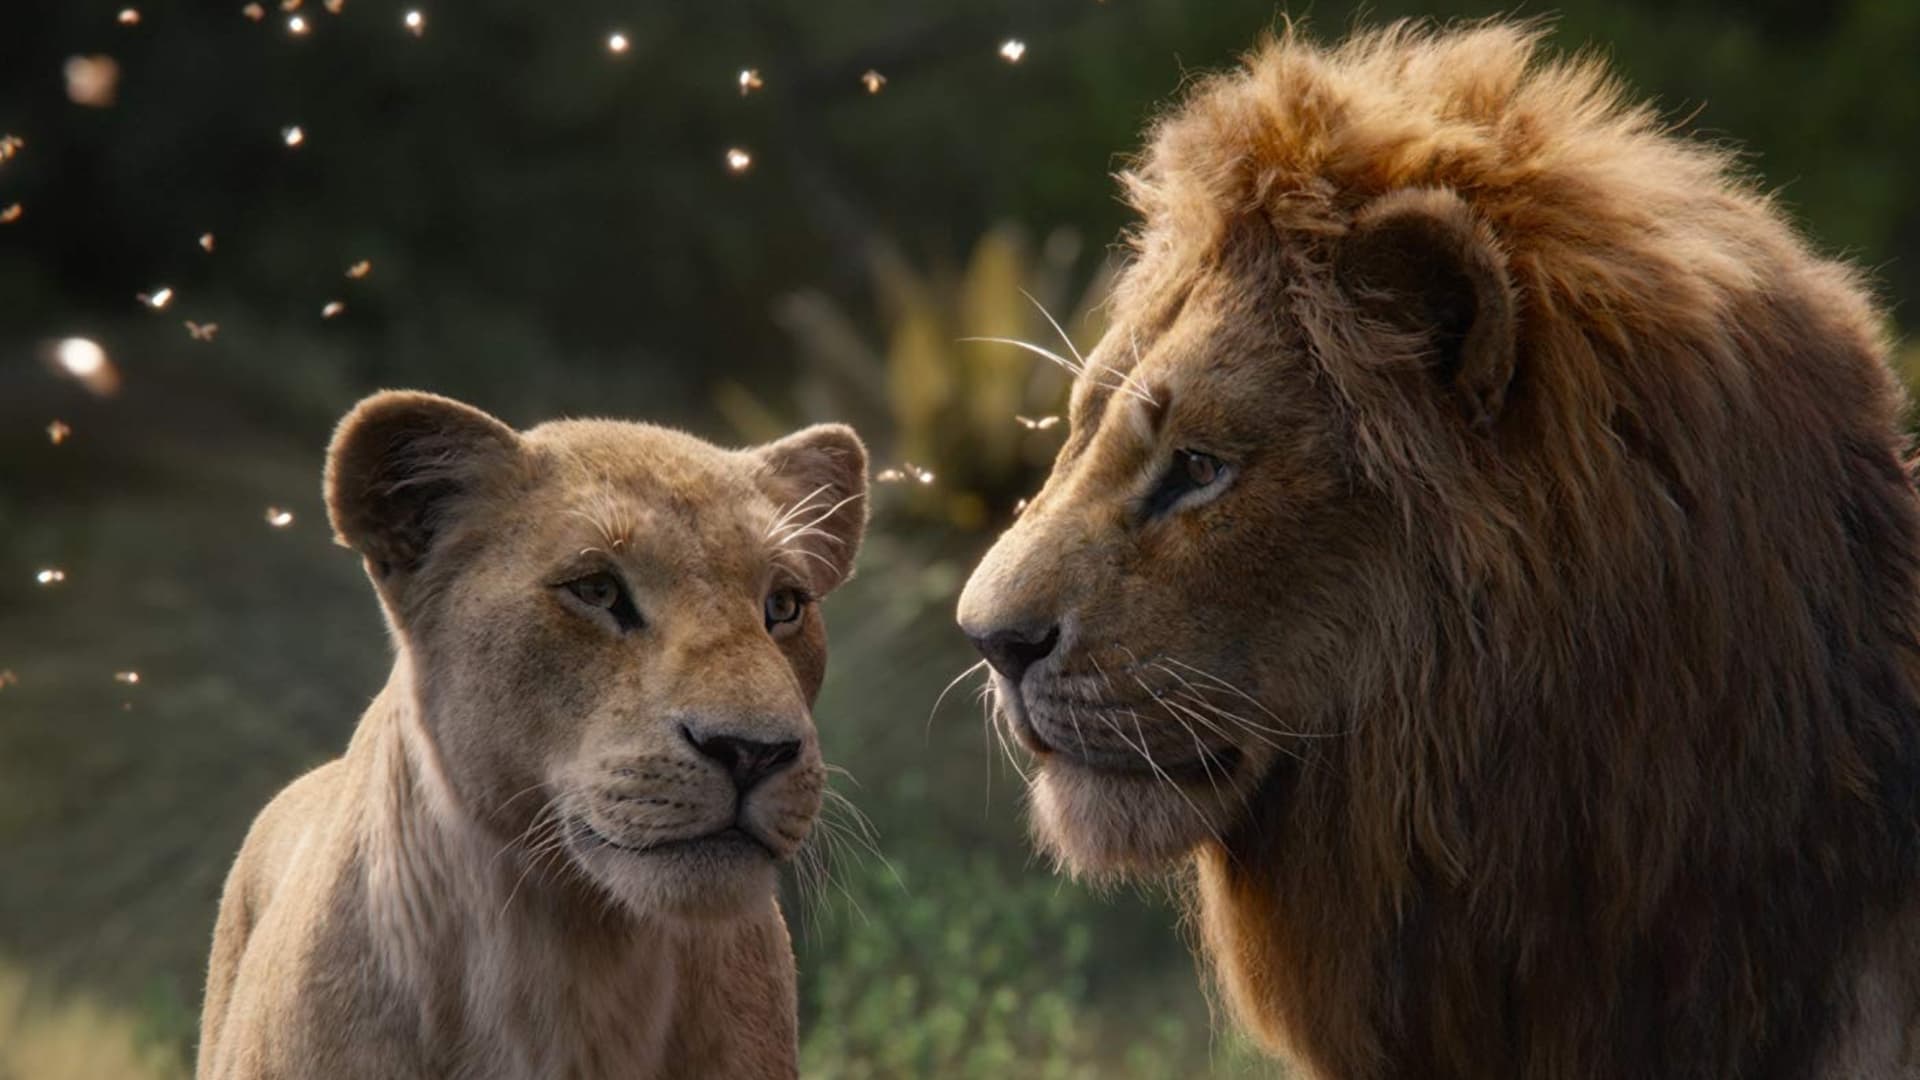 Disney Calls Lion King Live Action Golden Globes Says Its Animated